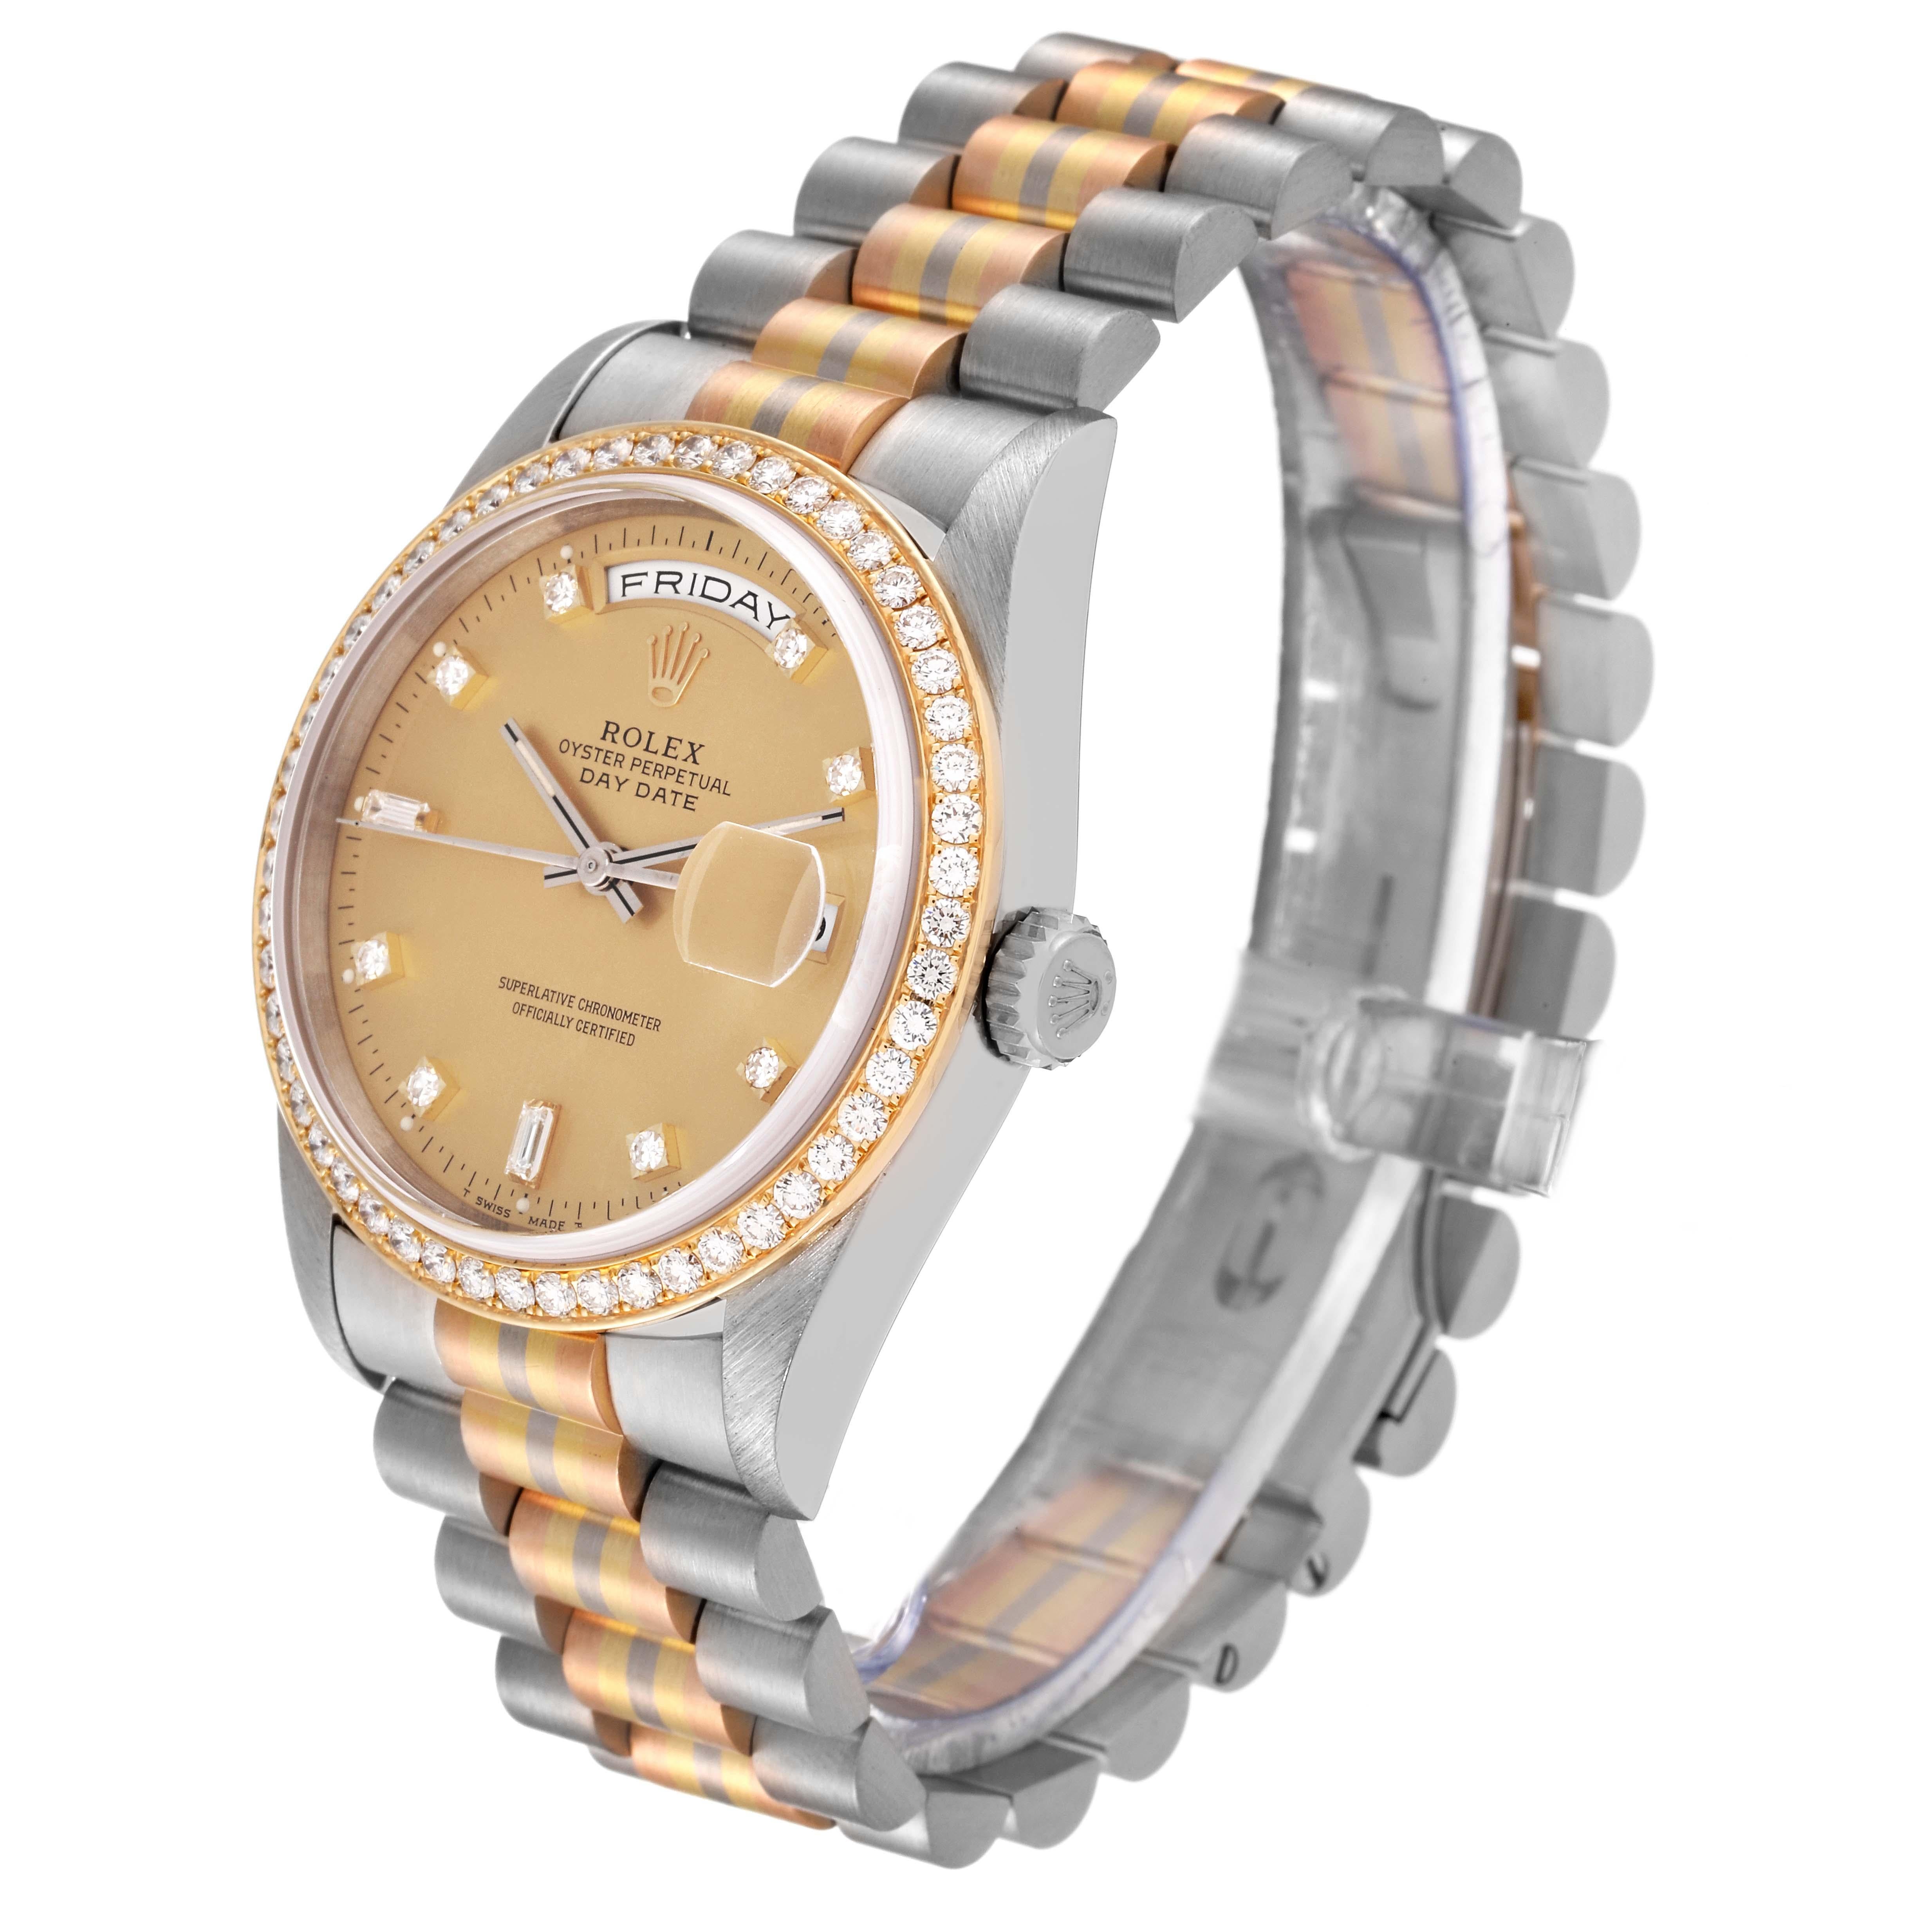 Rolex President Day-Date Tridor White Yellow Rose Gold Diamond Mens Watch 18349 Pour hommes en vente